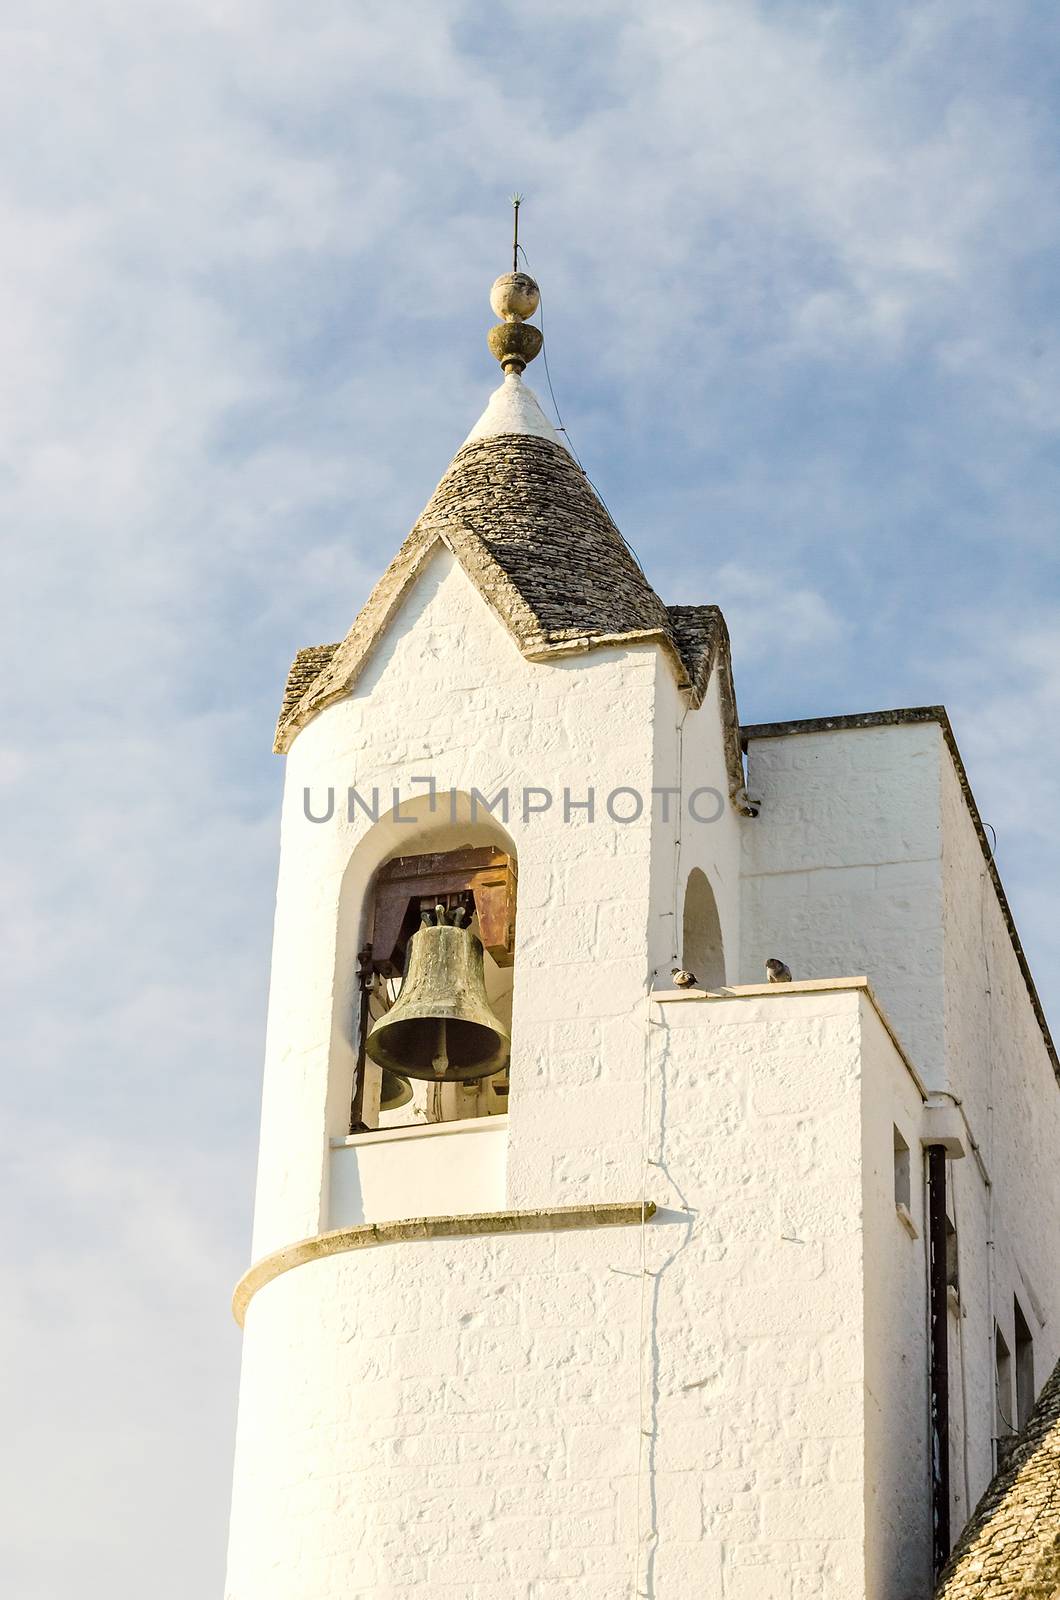 Belltower of the Trullo church in Alberobello, Italy. Trulli buildings are typical iconic houses in Apulia region